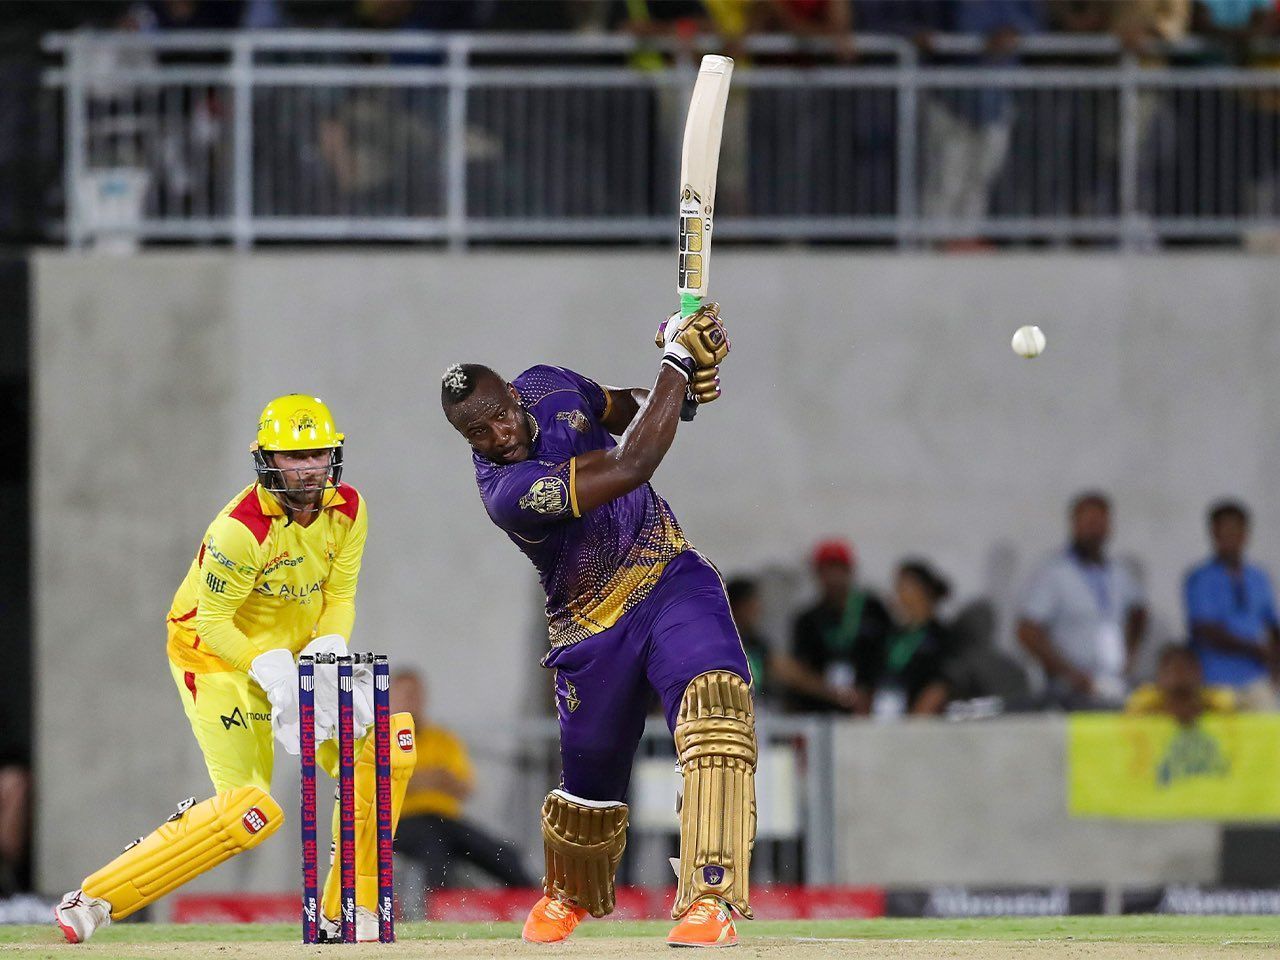 Andre Russell in action (Image Courtesy: Twitter/Los Angeles Knight Riders)